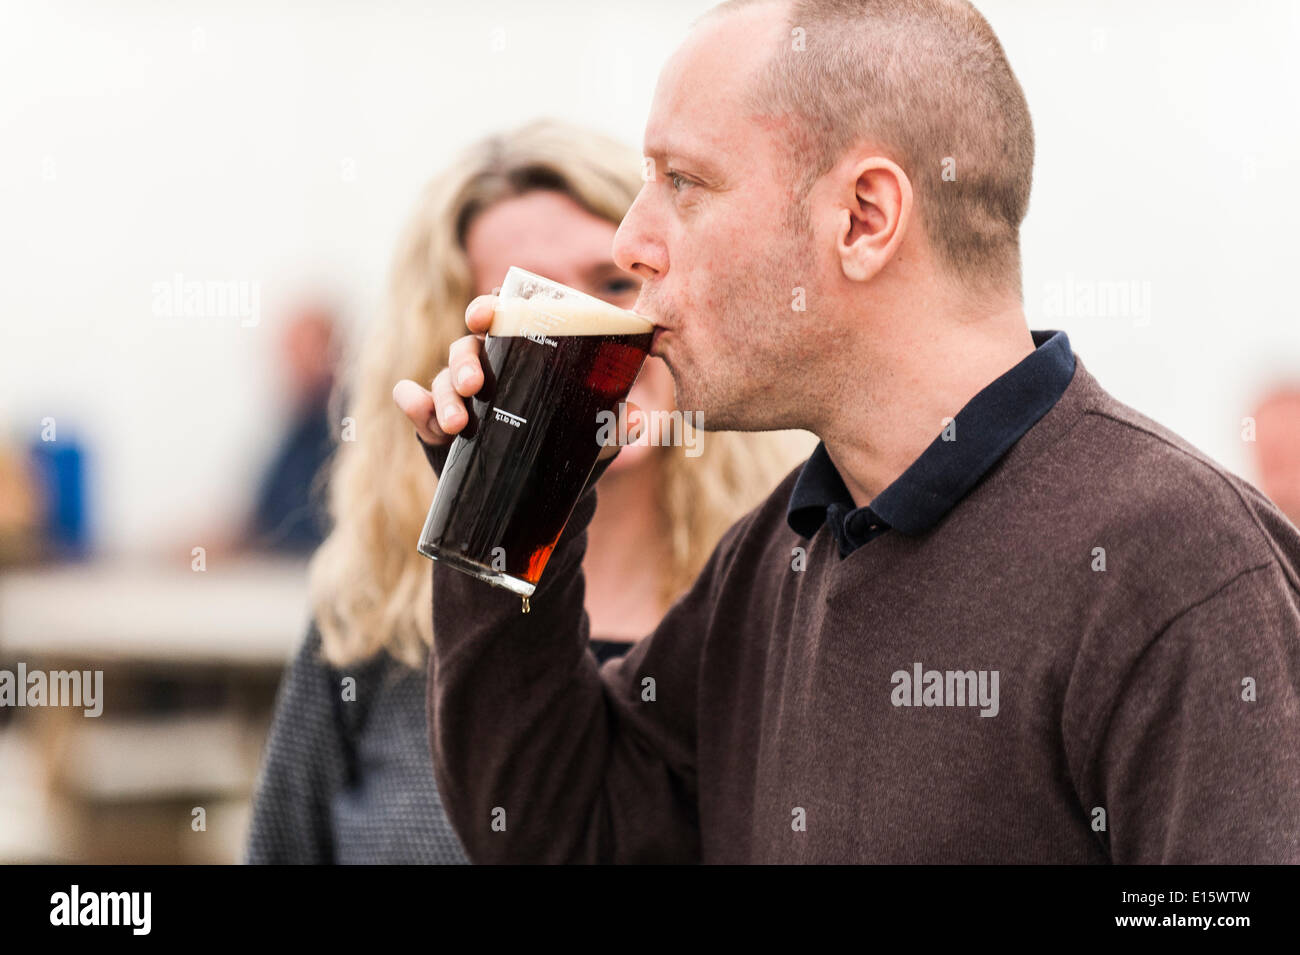 Stock, Essex. 23rd May, 2014.  Andy Woolfenden savours his first pint of ale on the opening day of THE HOOP BEER FESTIVAL, Essex's most famous beer festival.  Over the past twenty years, the Hoop beer festival in Stock Village has become an annual event, drawing serious beer supping folk from as far away as Norway and Australia.  Photographer: Gordon Scammell/Alamy Live News Stock Photo